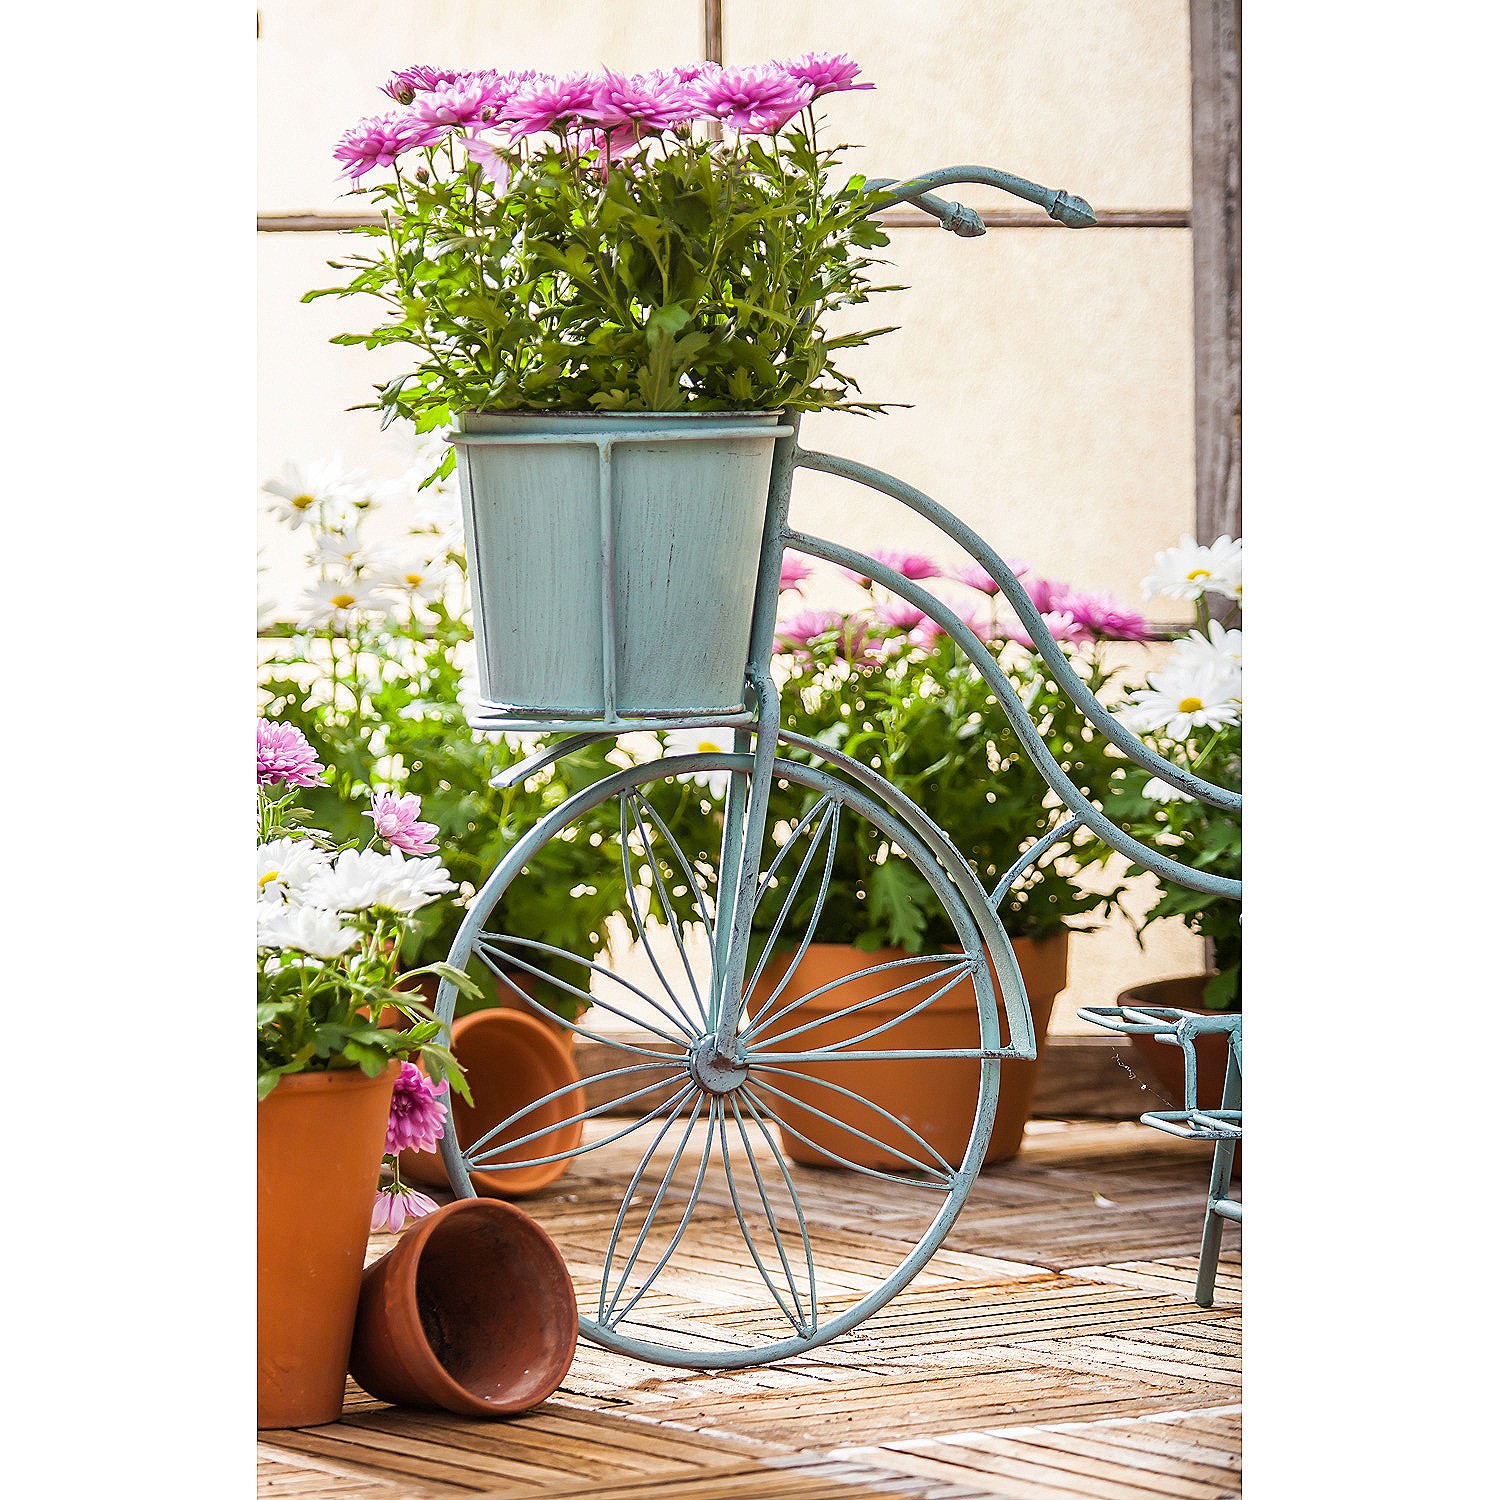 Evergreen Vintage Teal Bicycle Planter Outdoor Safe Decor - image 4 of 5